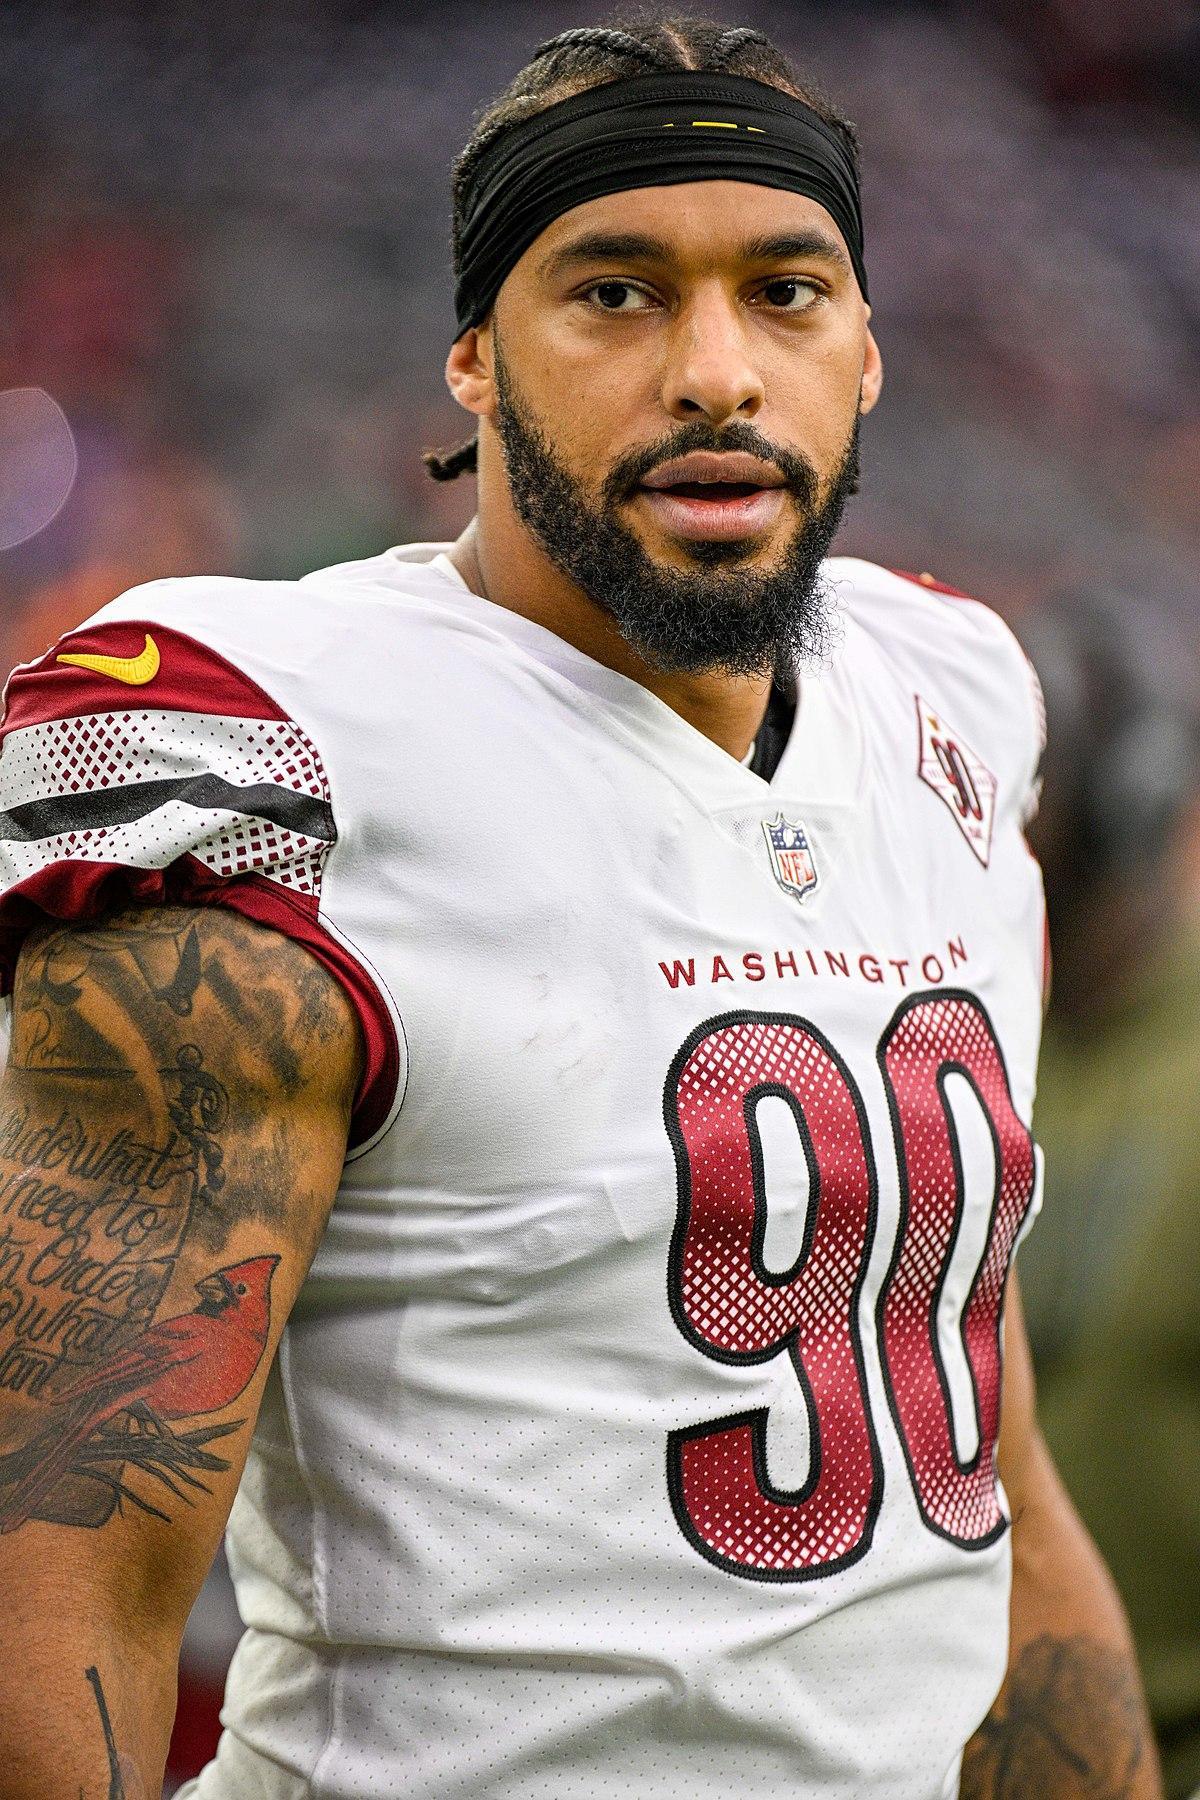 Montez Sweat Biography, Age, Height, Injury,Brother and Redskins teammate